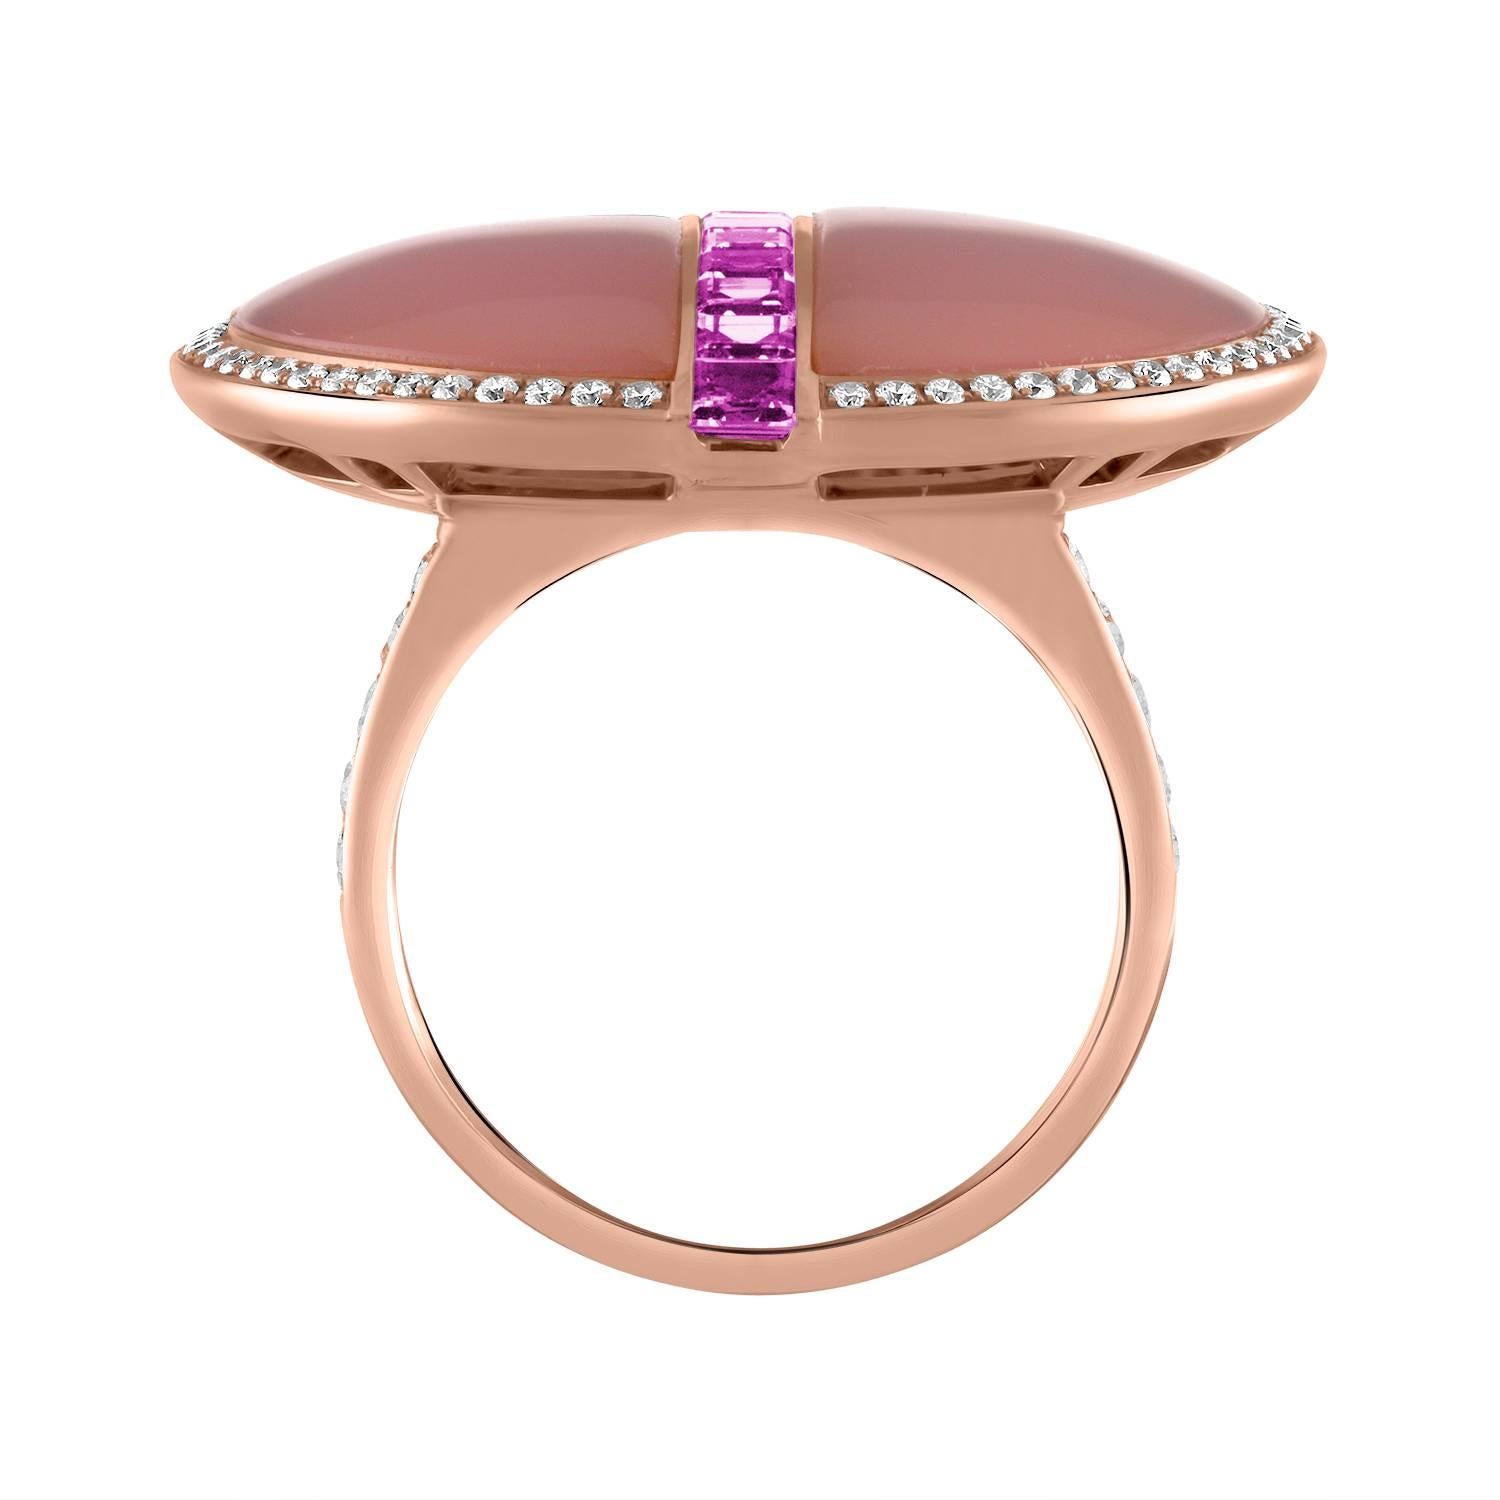 Shah & Shah's 18k rose gold, 9.75ct pink agate, 1.02ct pink sapphires and 0.41ct round brilliant cut diamond ring.

The ring is a size 6.5. Initial sizing is complimentary and an insurance appraisal is included with your purchase.